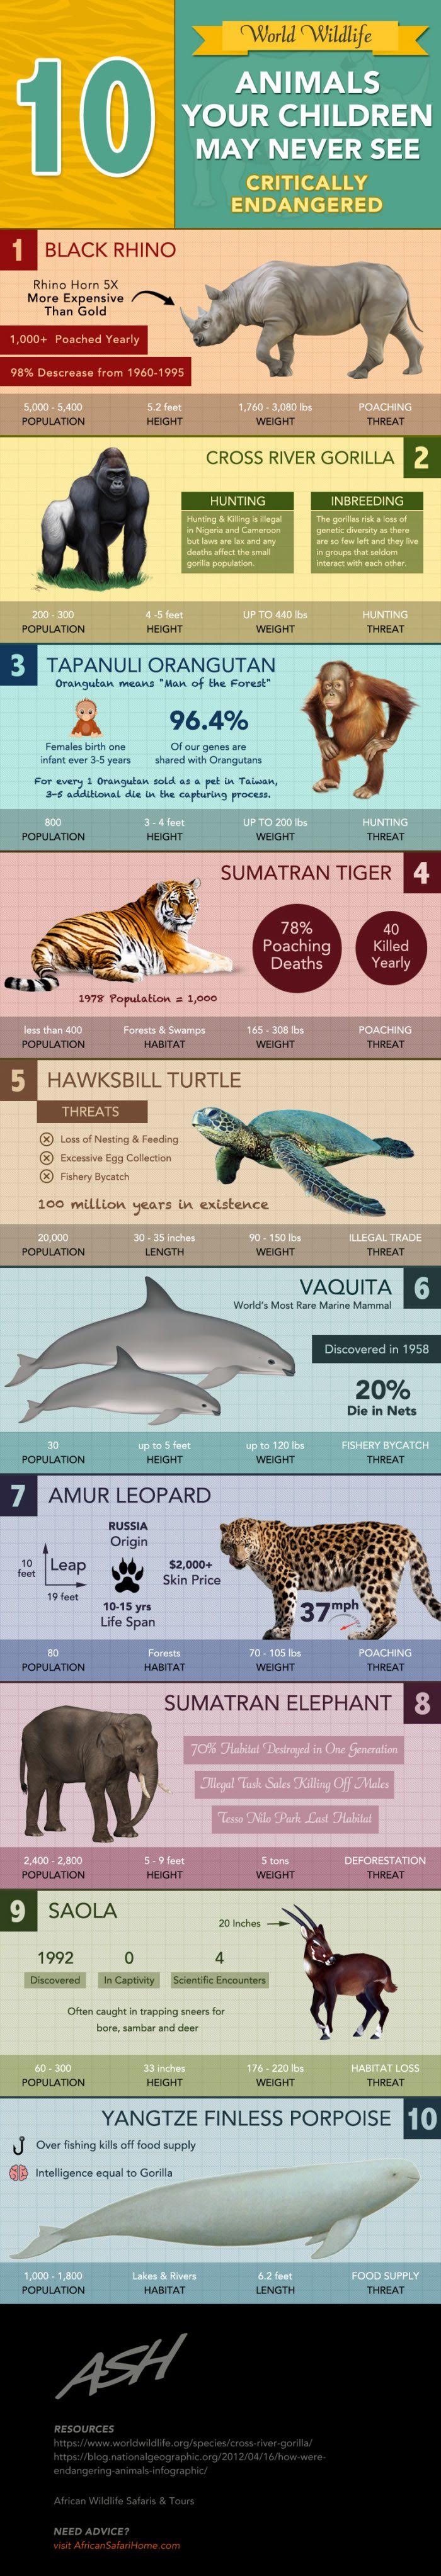 10 Animals Your Children May Never See #infographic